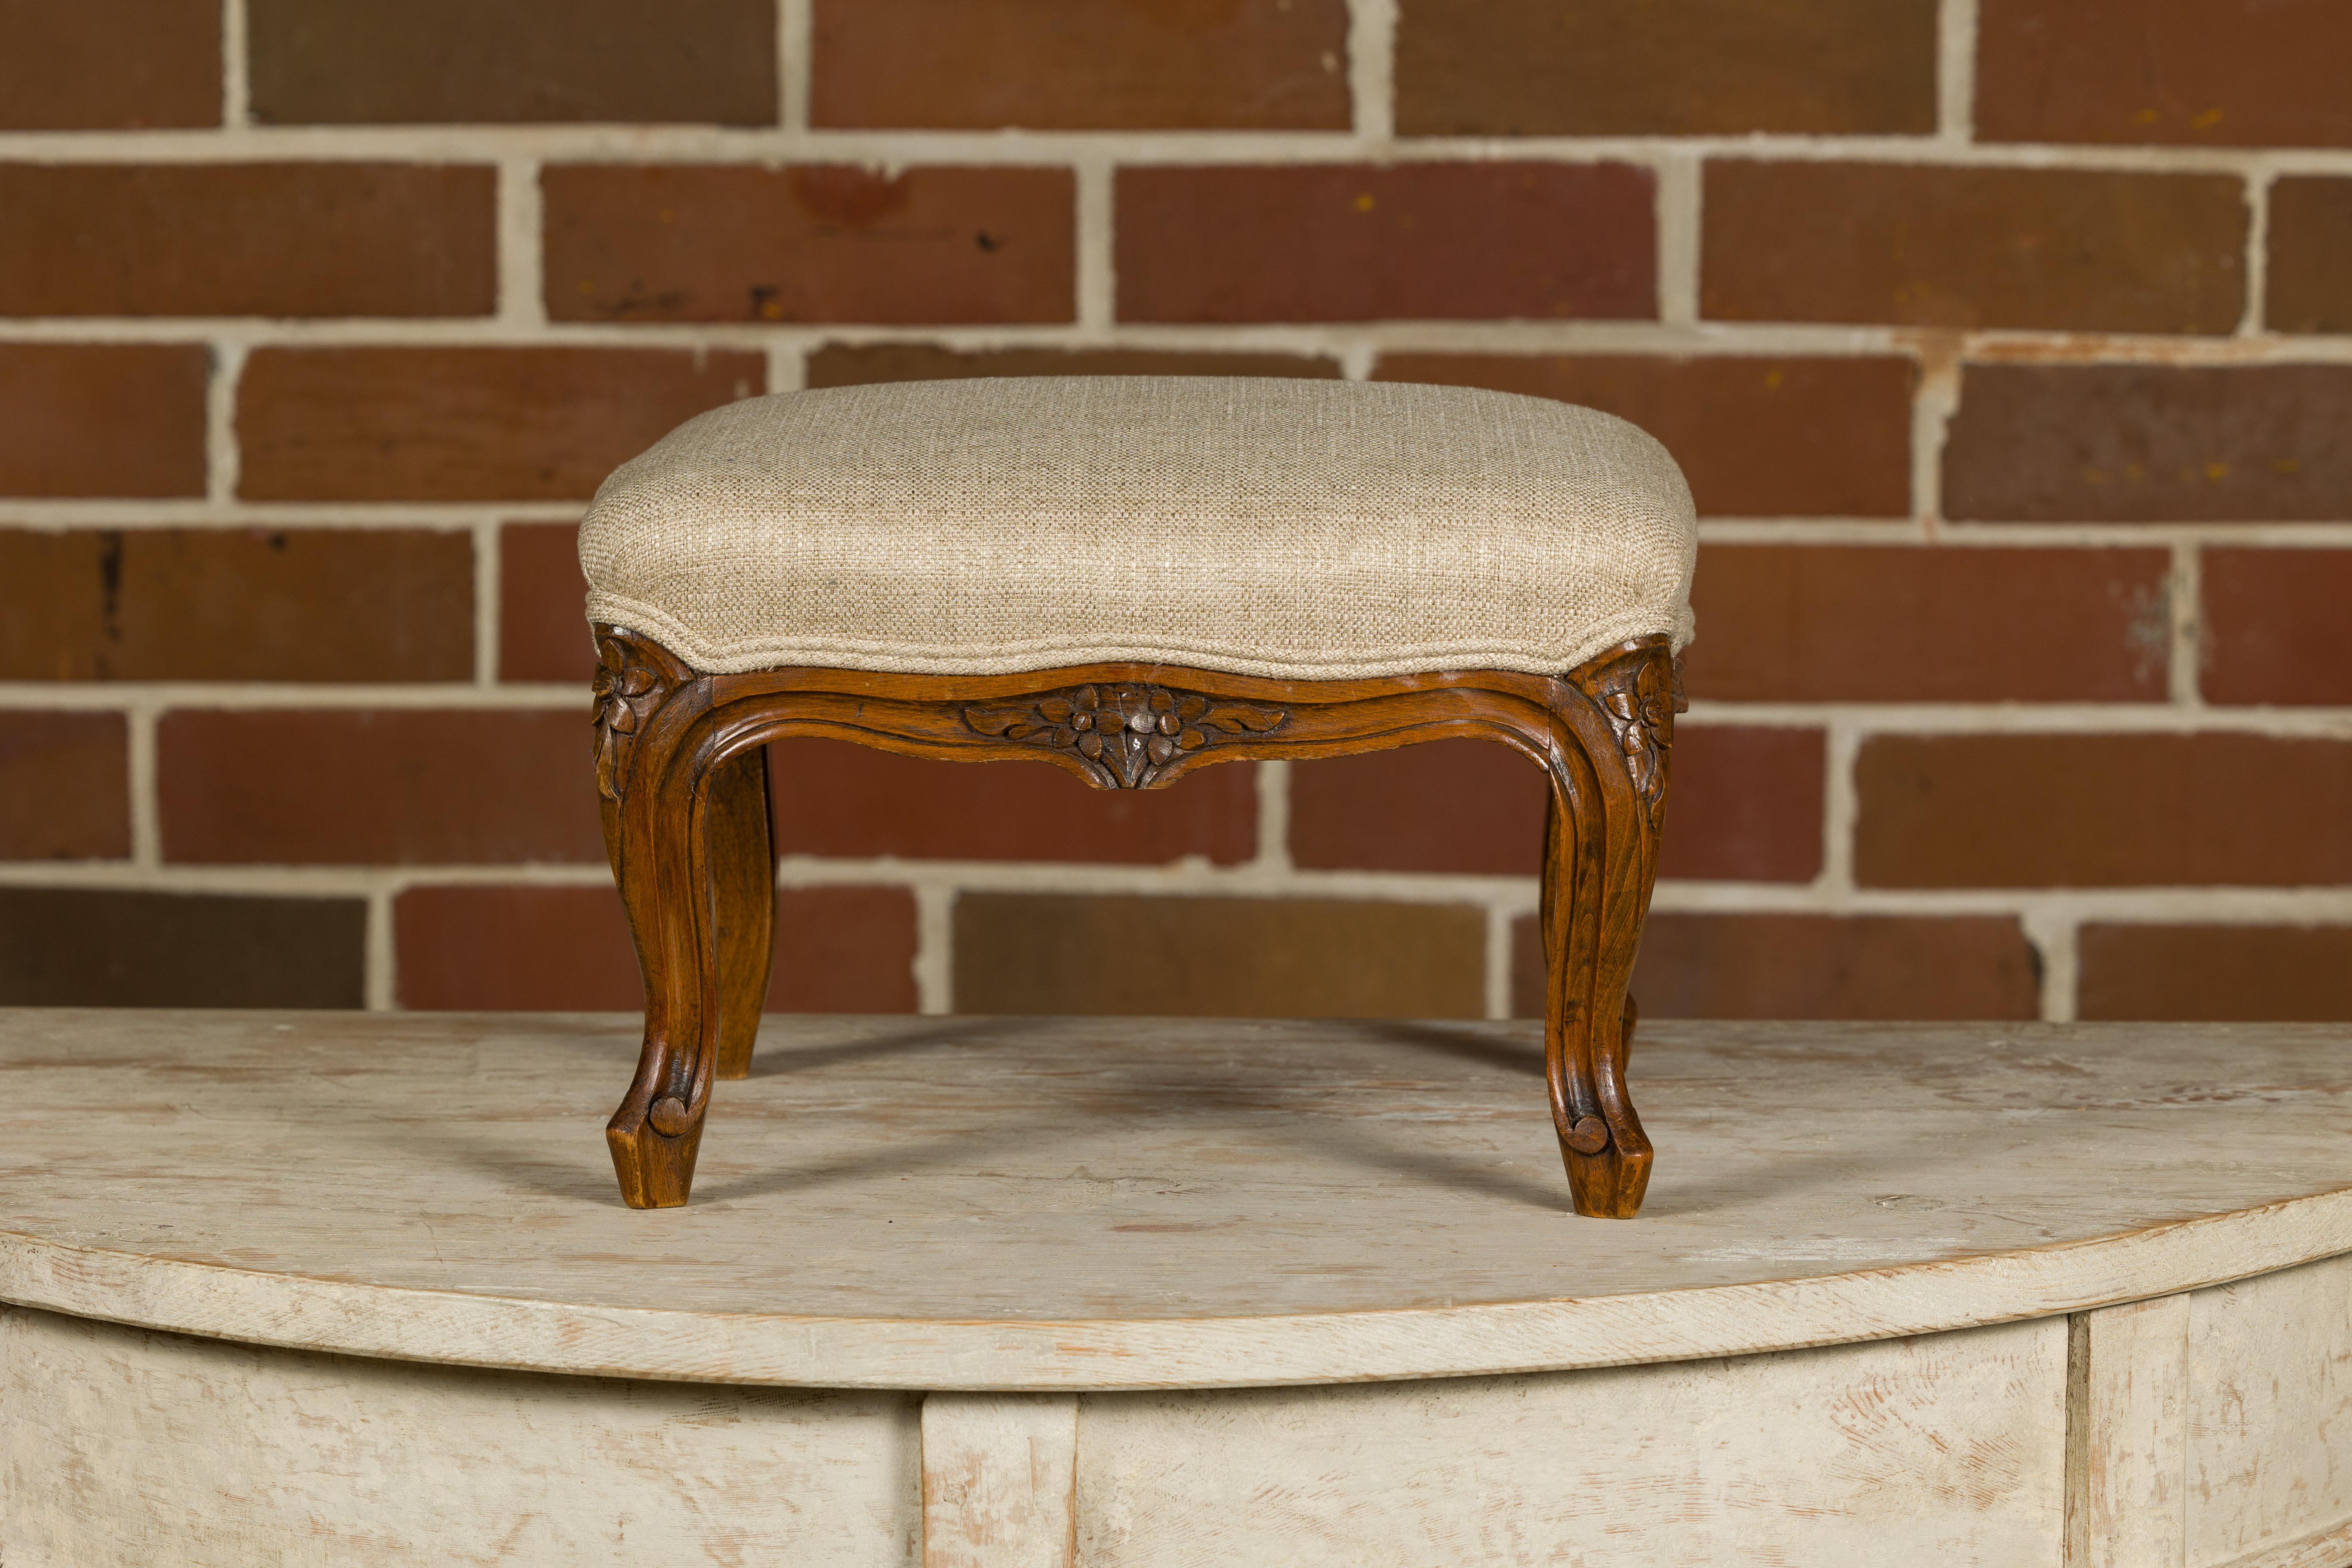 A French Louis XV style wooden footstool from the 19th century with carved cabriole legs and double welt linen custom upholstery. Elevate the elegance of your living space with this exquisite 19th-century French Louis XV style wooden footstool.